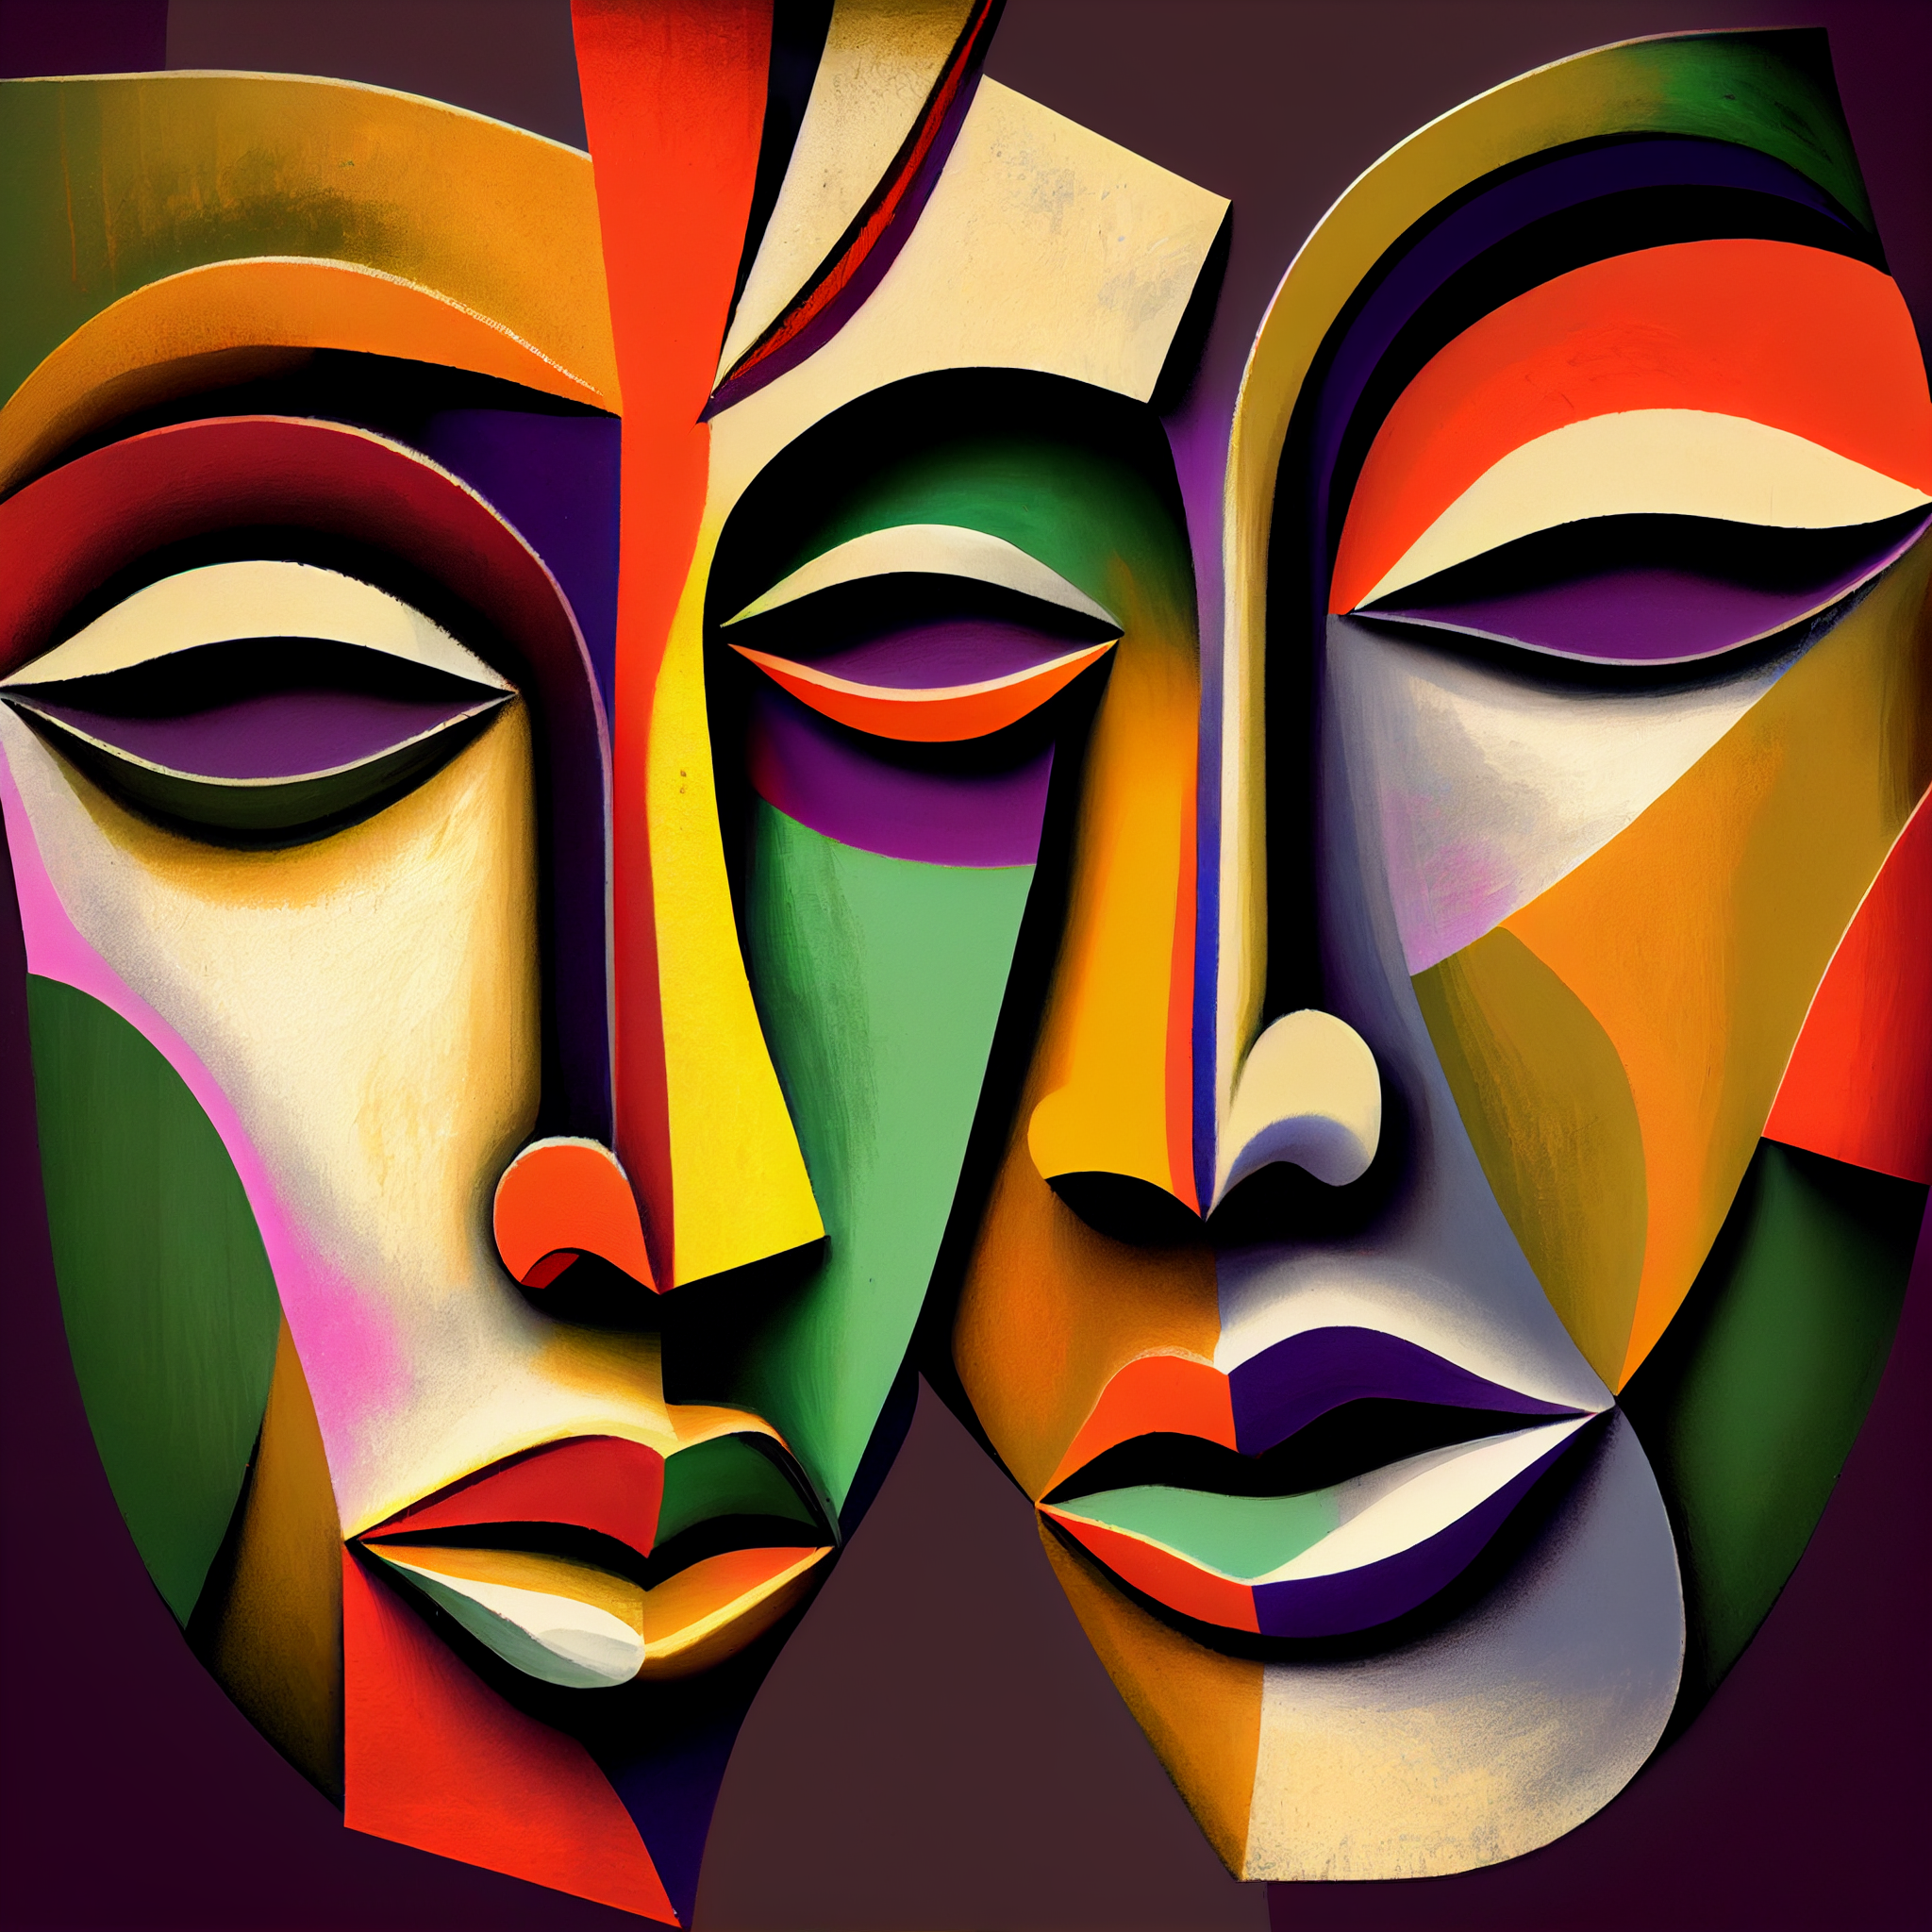 Dual Perspectives: A Captivating Acrylic Abstract Art Print of Two Faces